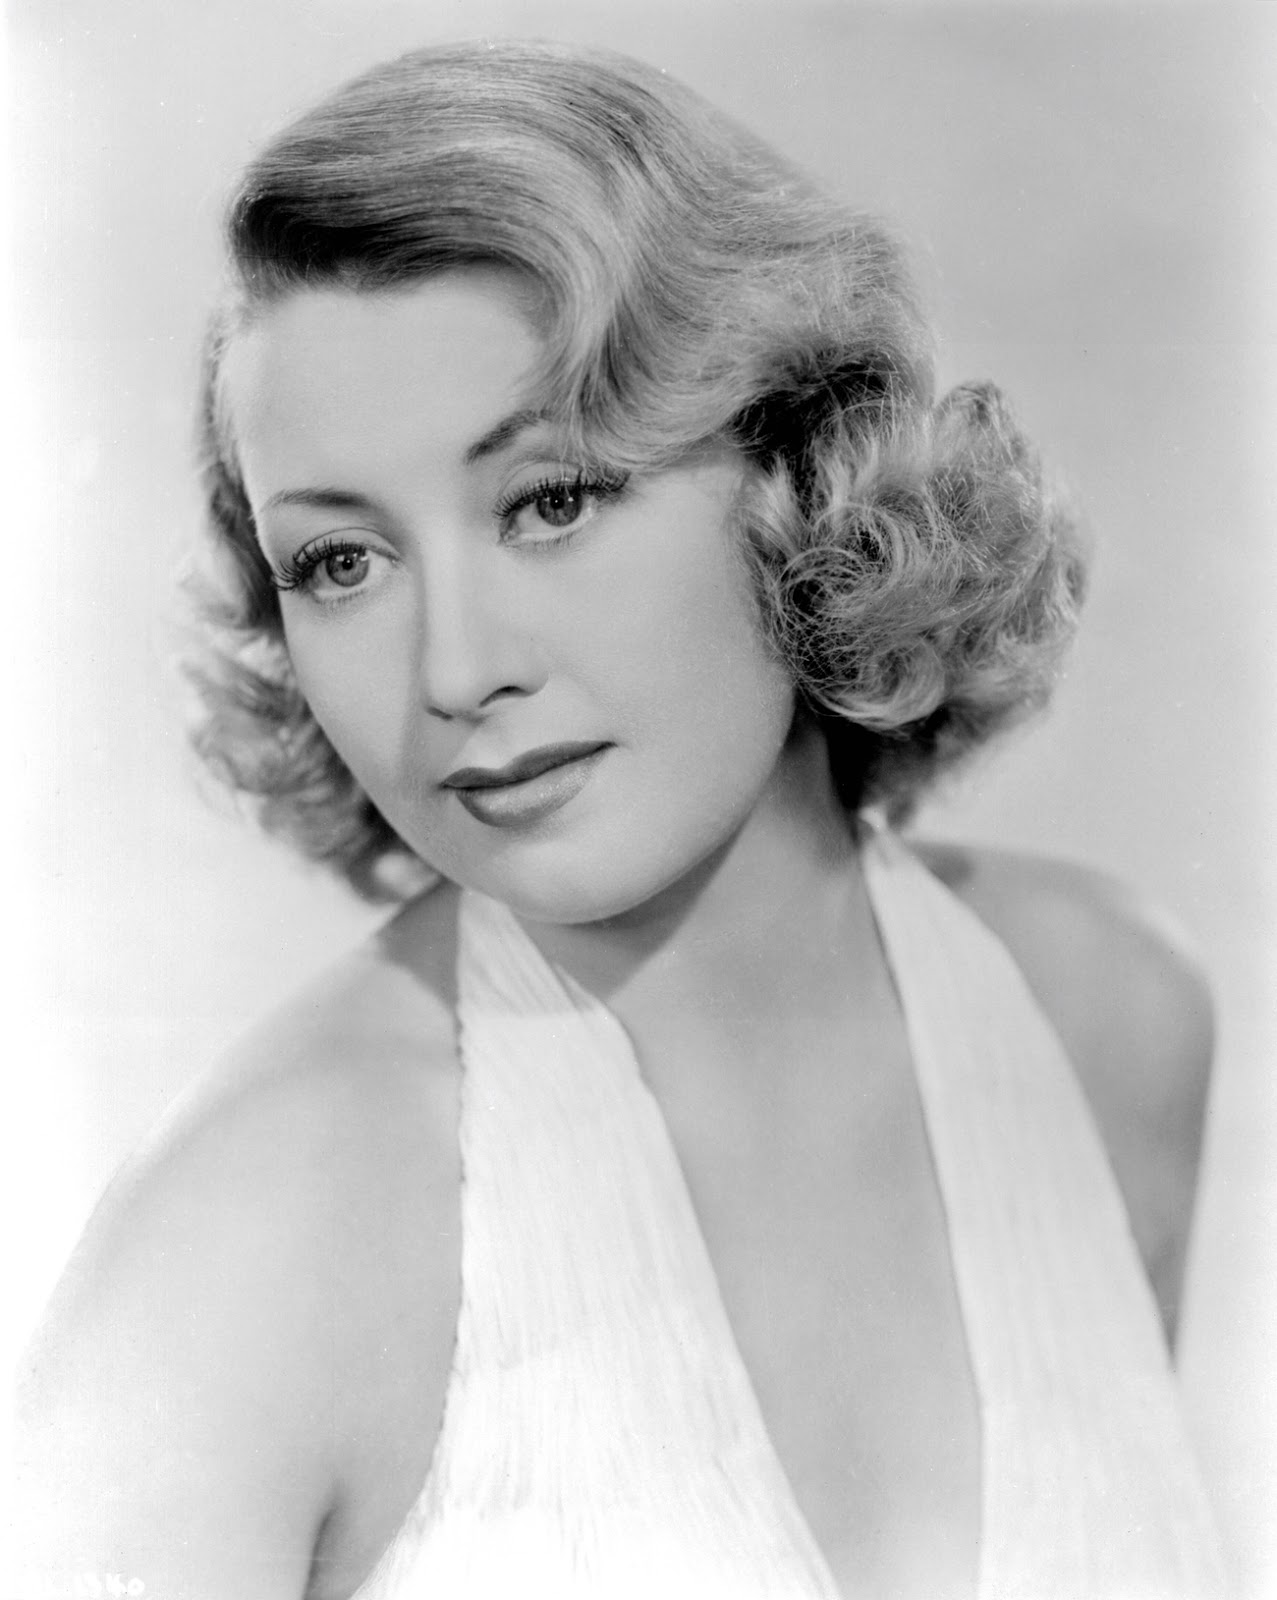 JOAN BLONDELL - nominated once.